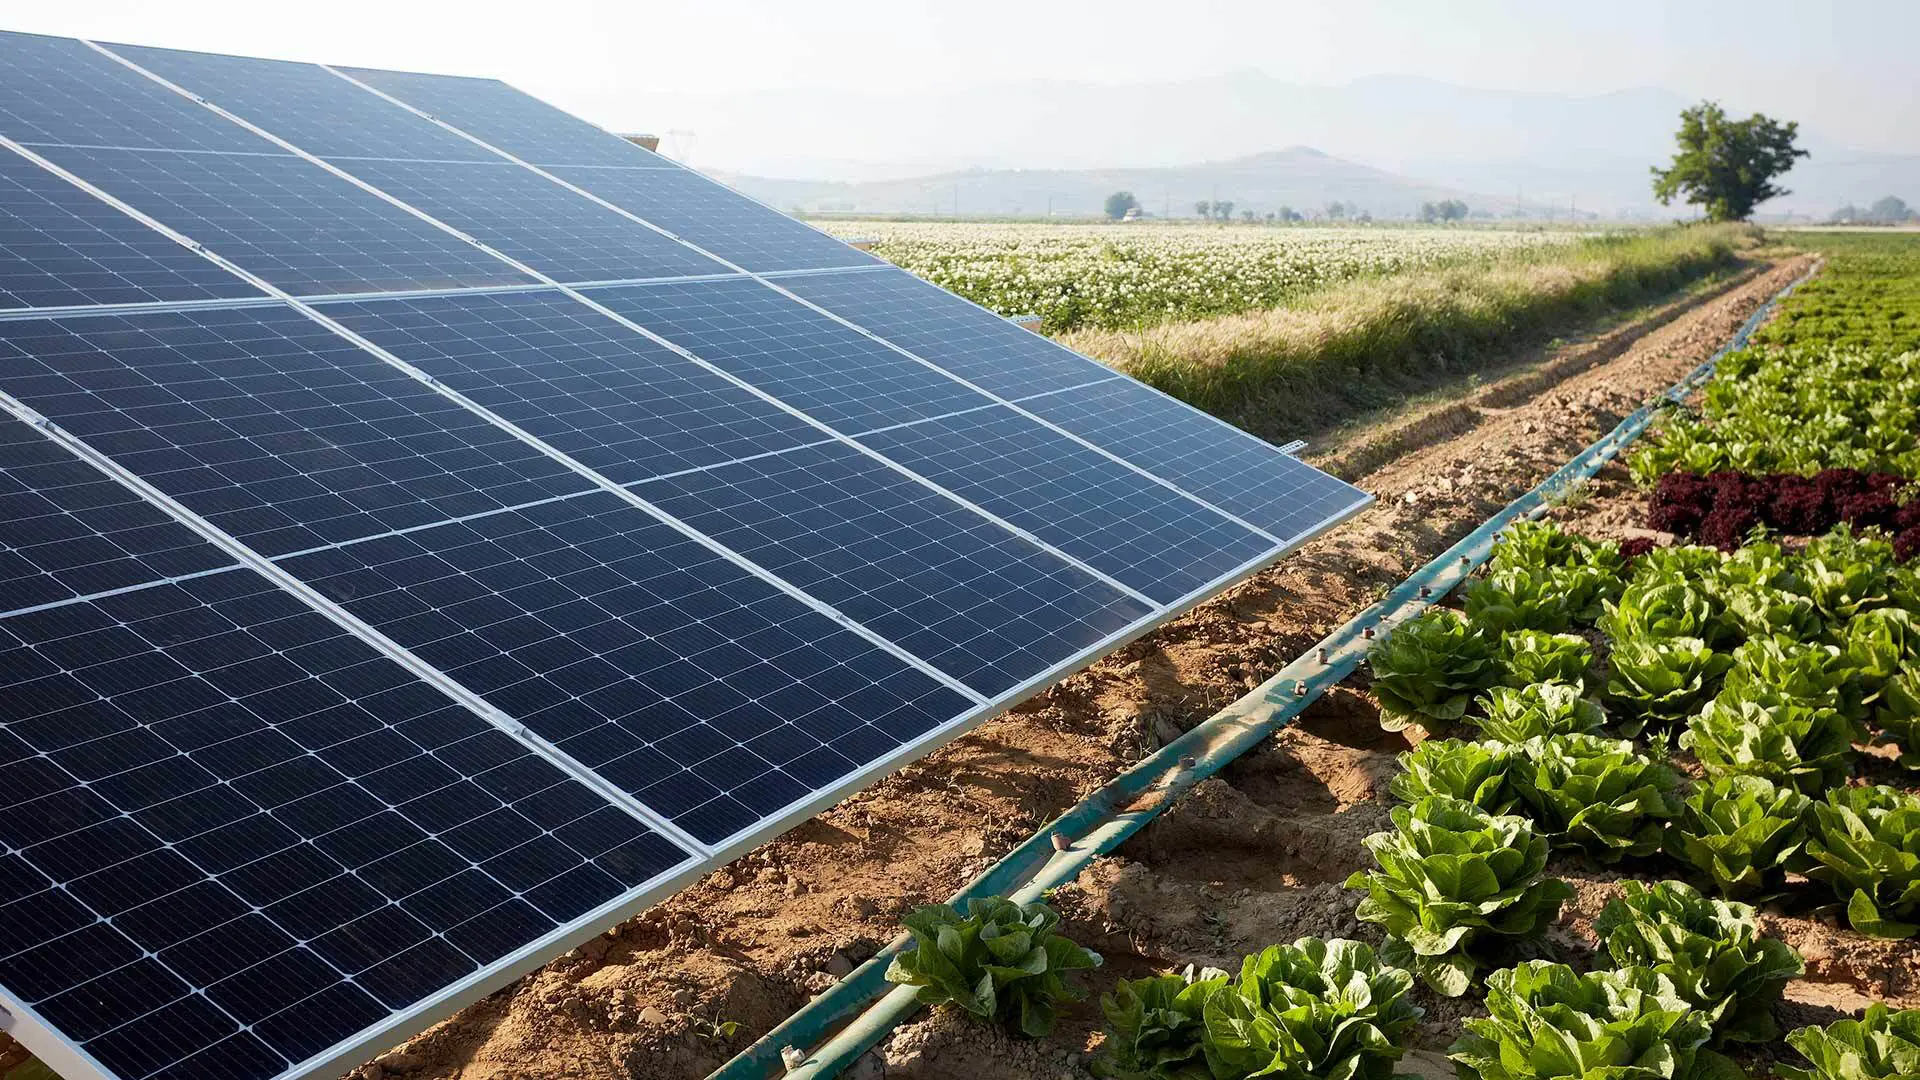 Introducing solar panels to agricultural fields across Maryland could provide both economic and environmental benefits. A UMD Extension proposal to design these agrivoltaic systems is one of the 13 projects that has been awarded a Sustainability Fund grant this year.